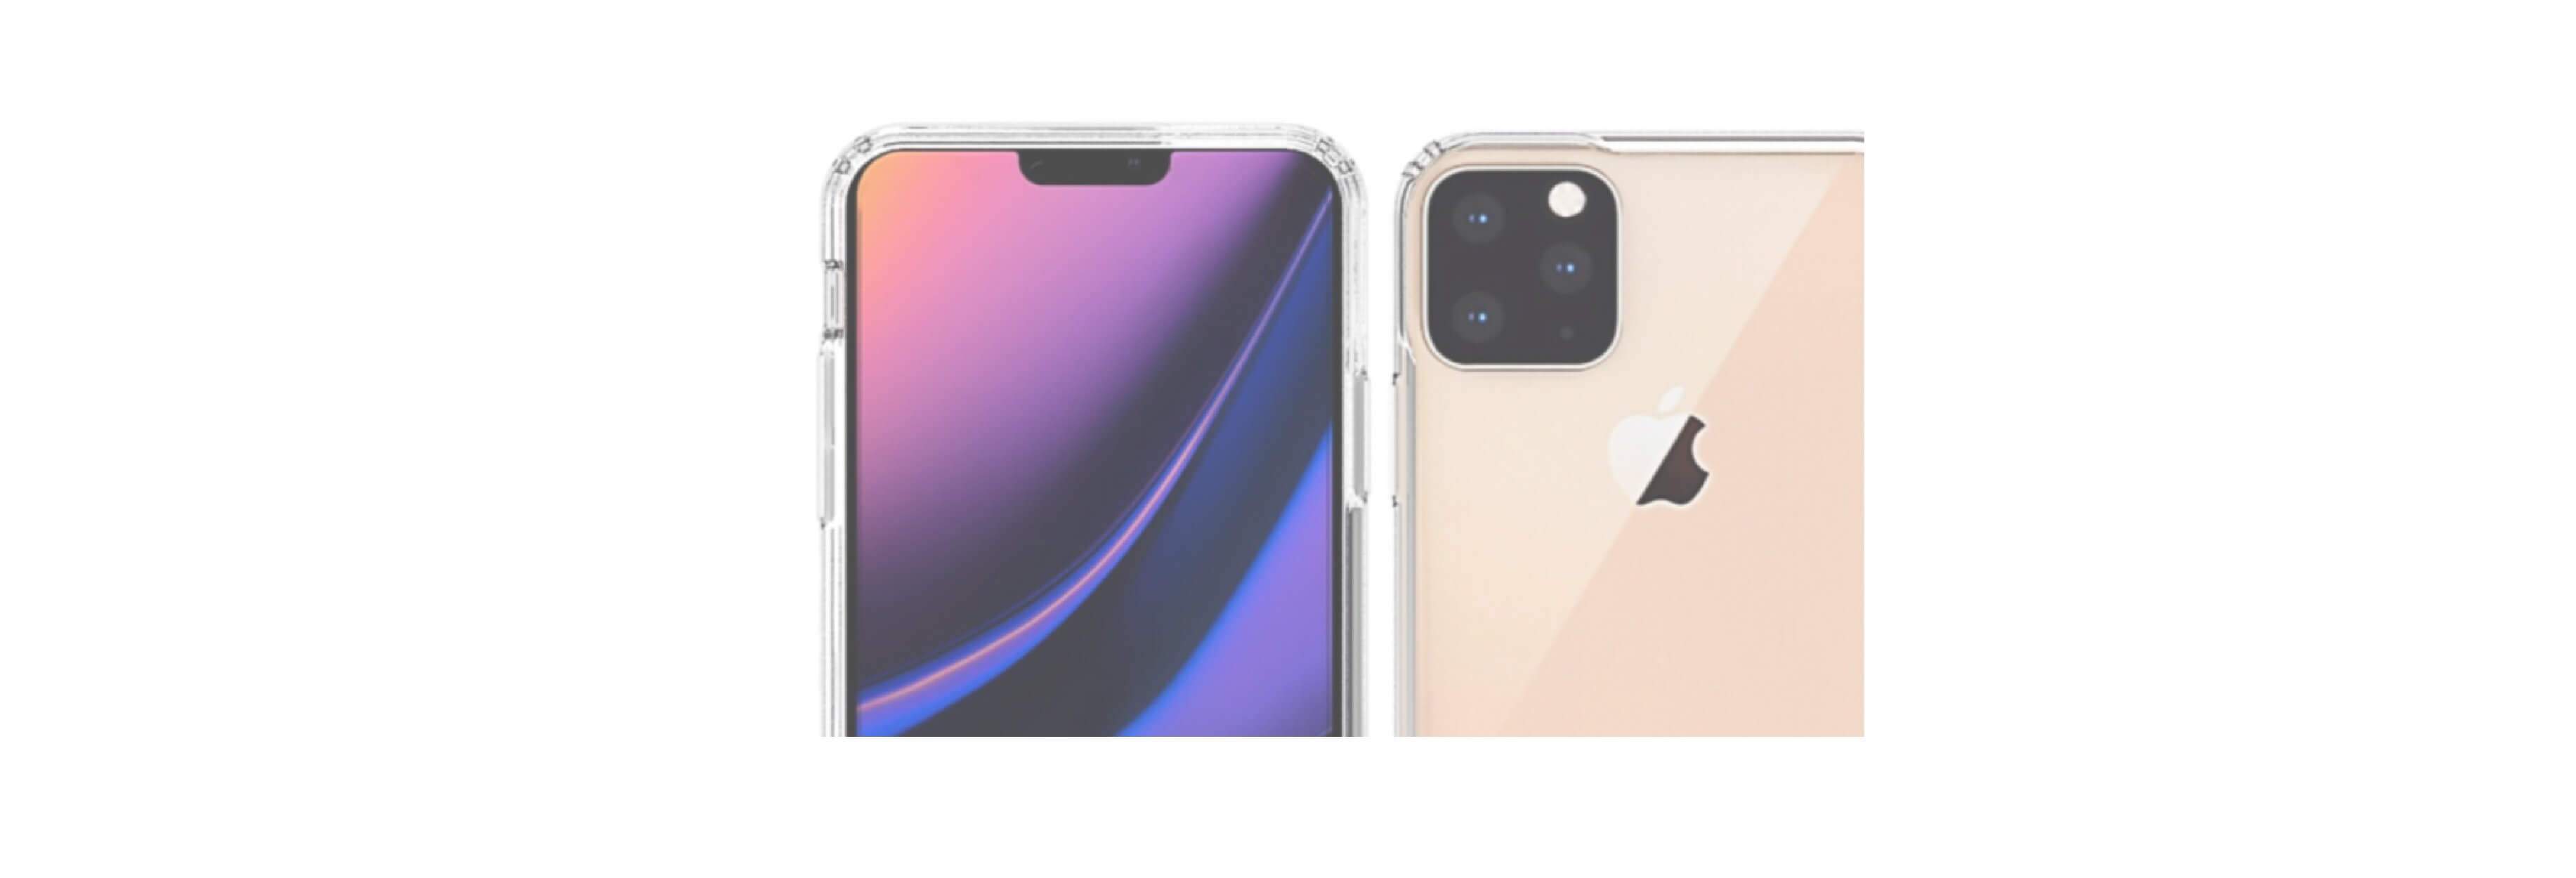 iPhone 11 Pro  Release Dates, Features, Specs, Prices